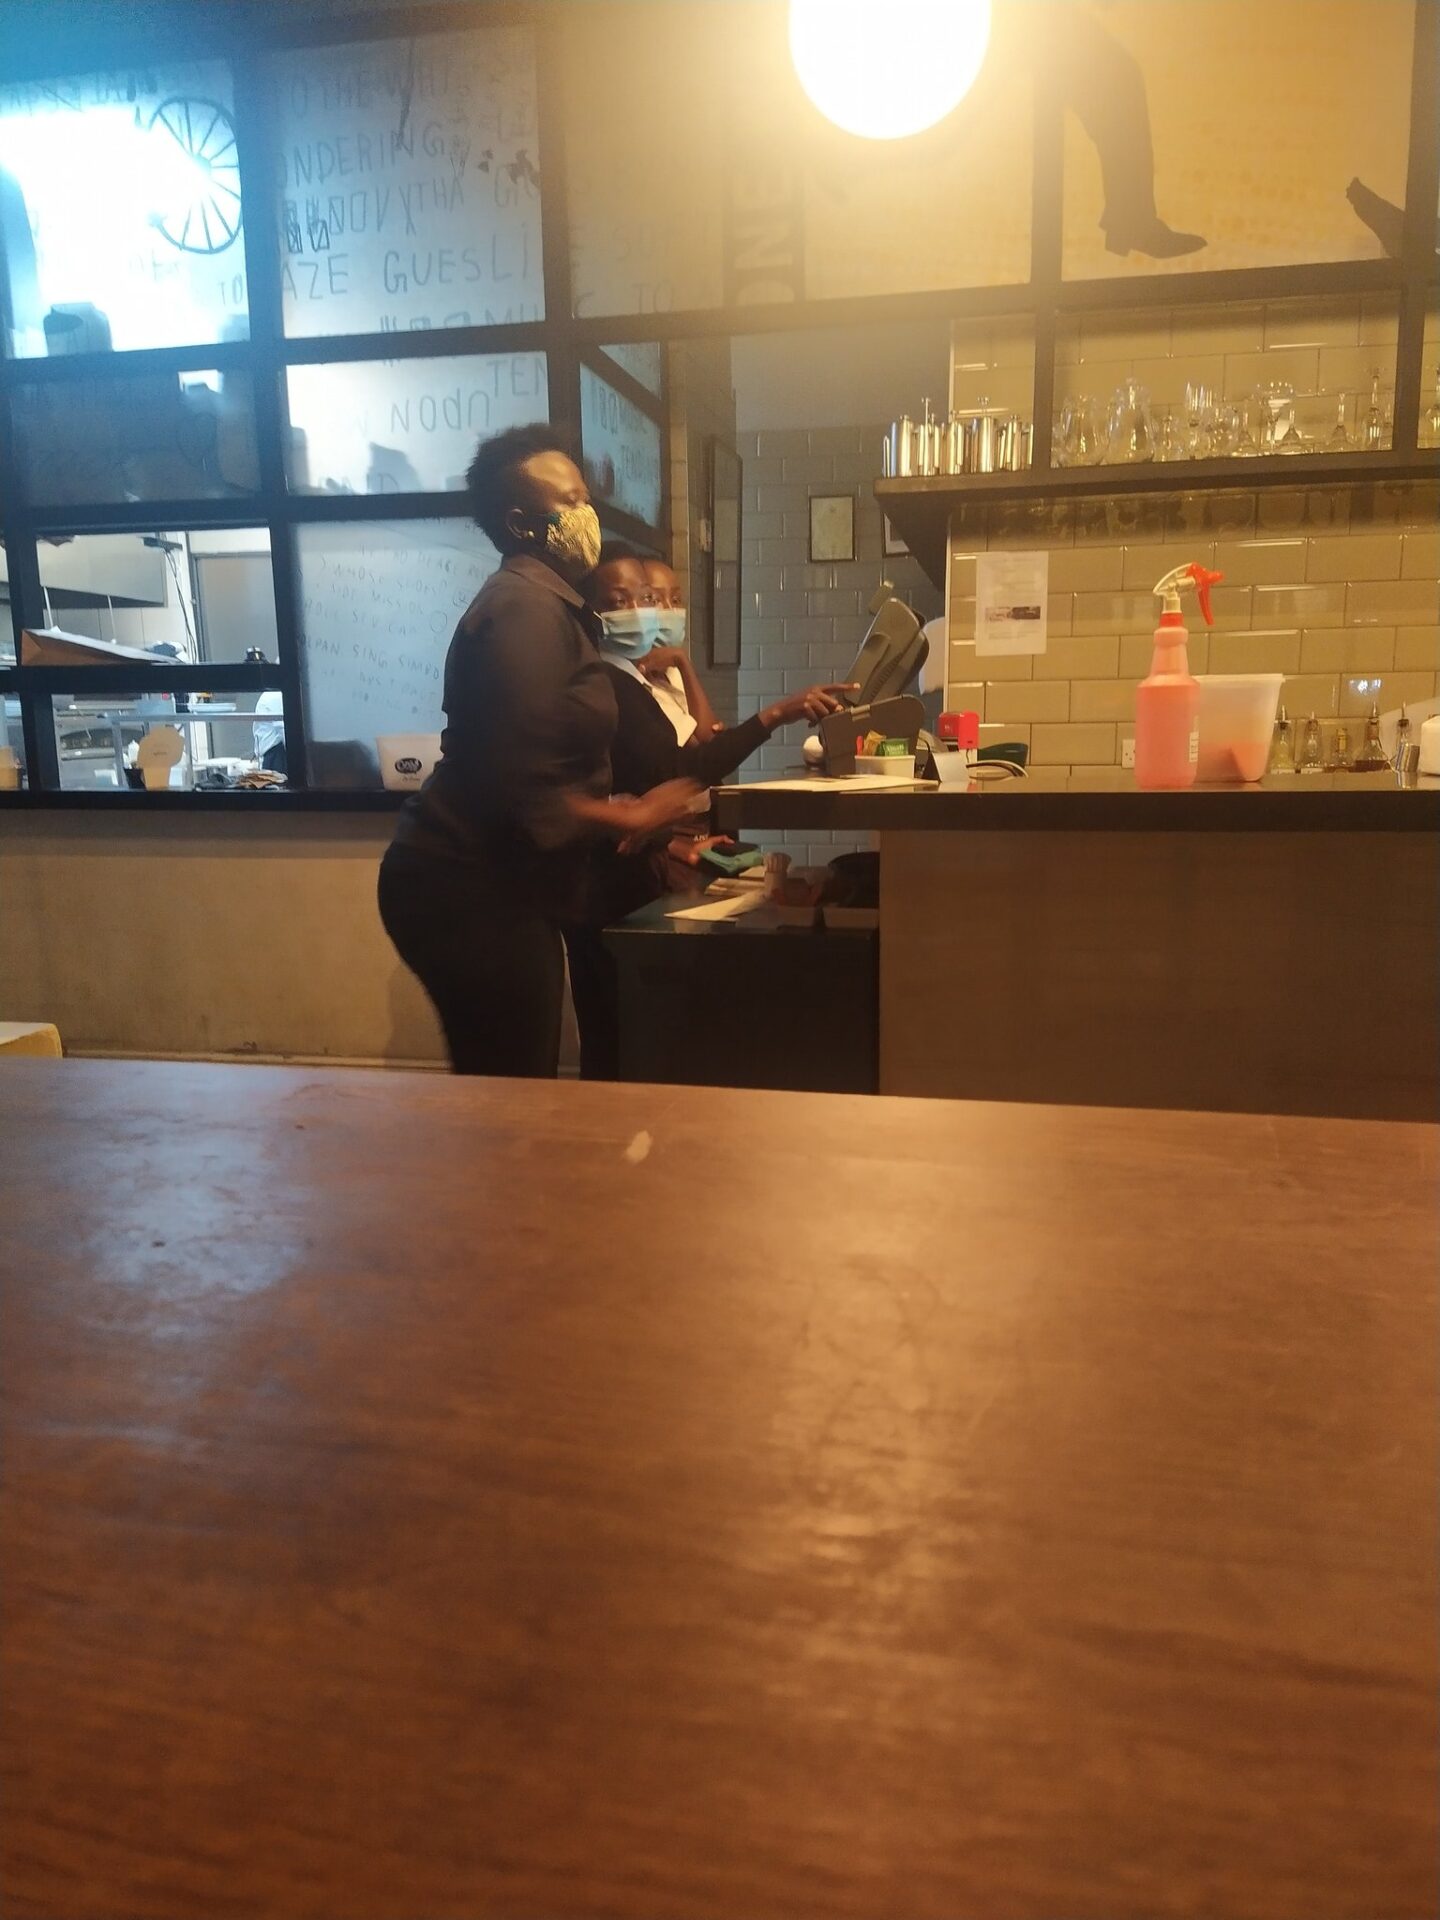 CAPTION: Artcaffe Lavington Branch Manager Jane Amonje as captured by a Twitter user who claimed to have witnessed her publicly harass a waitress on Thursday, November 26 